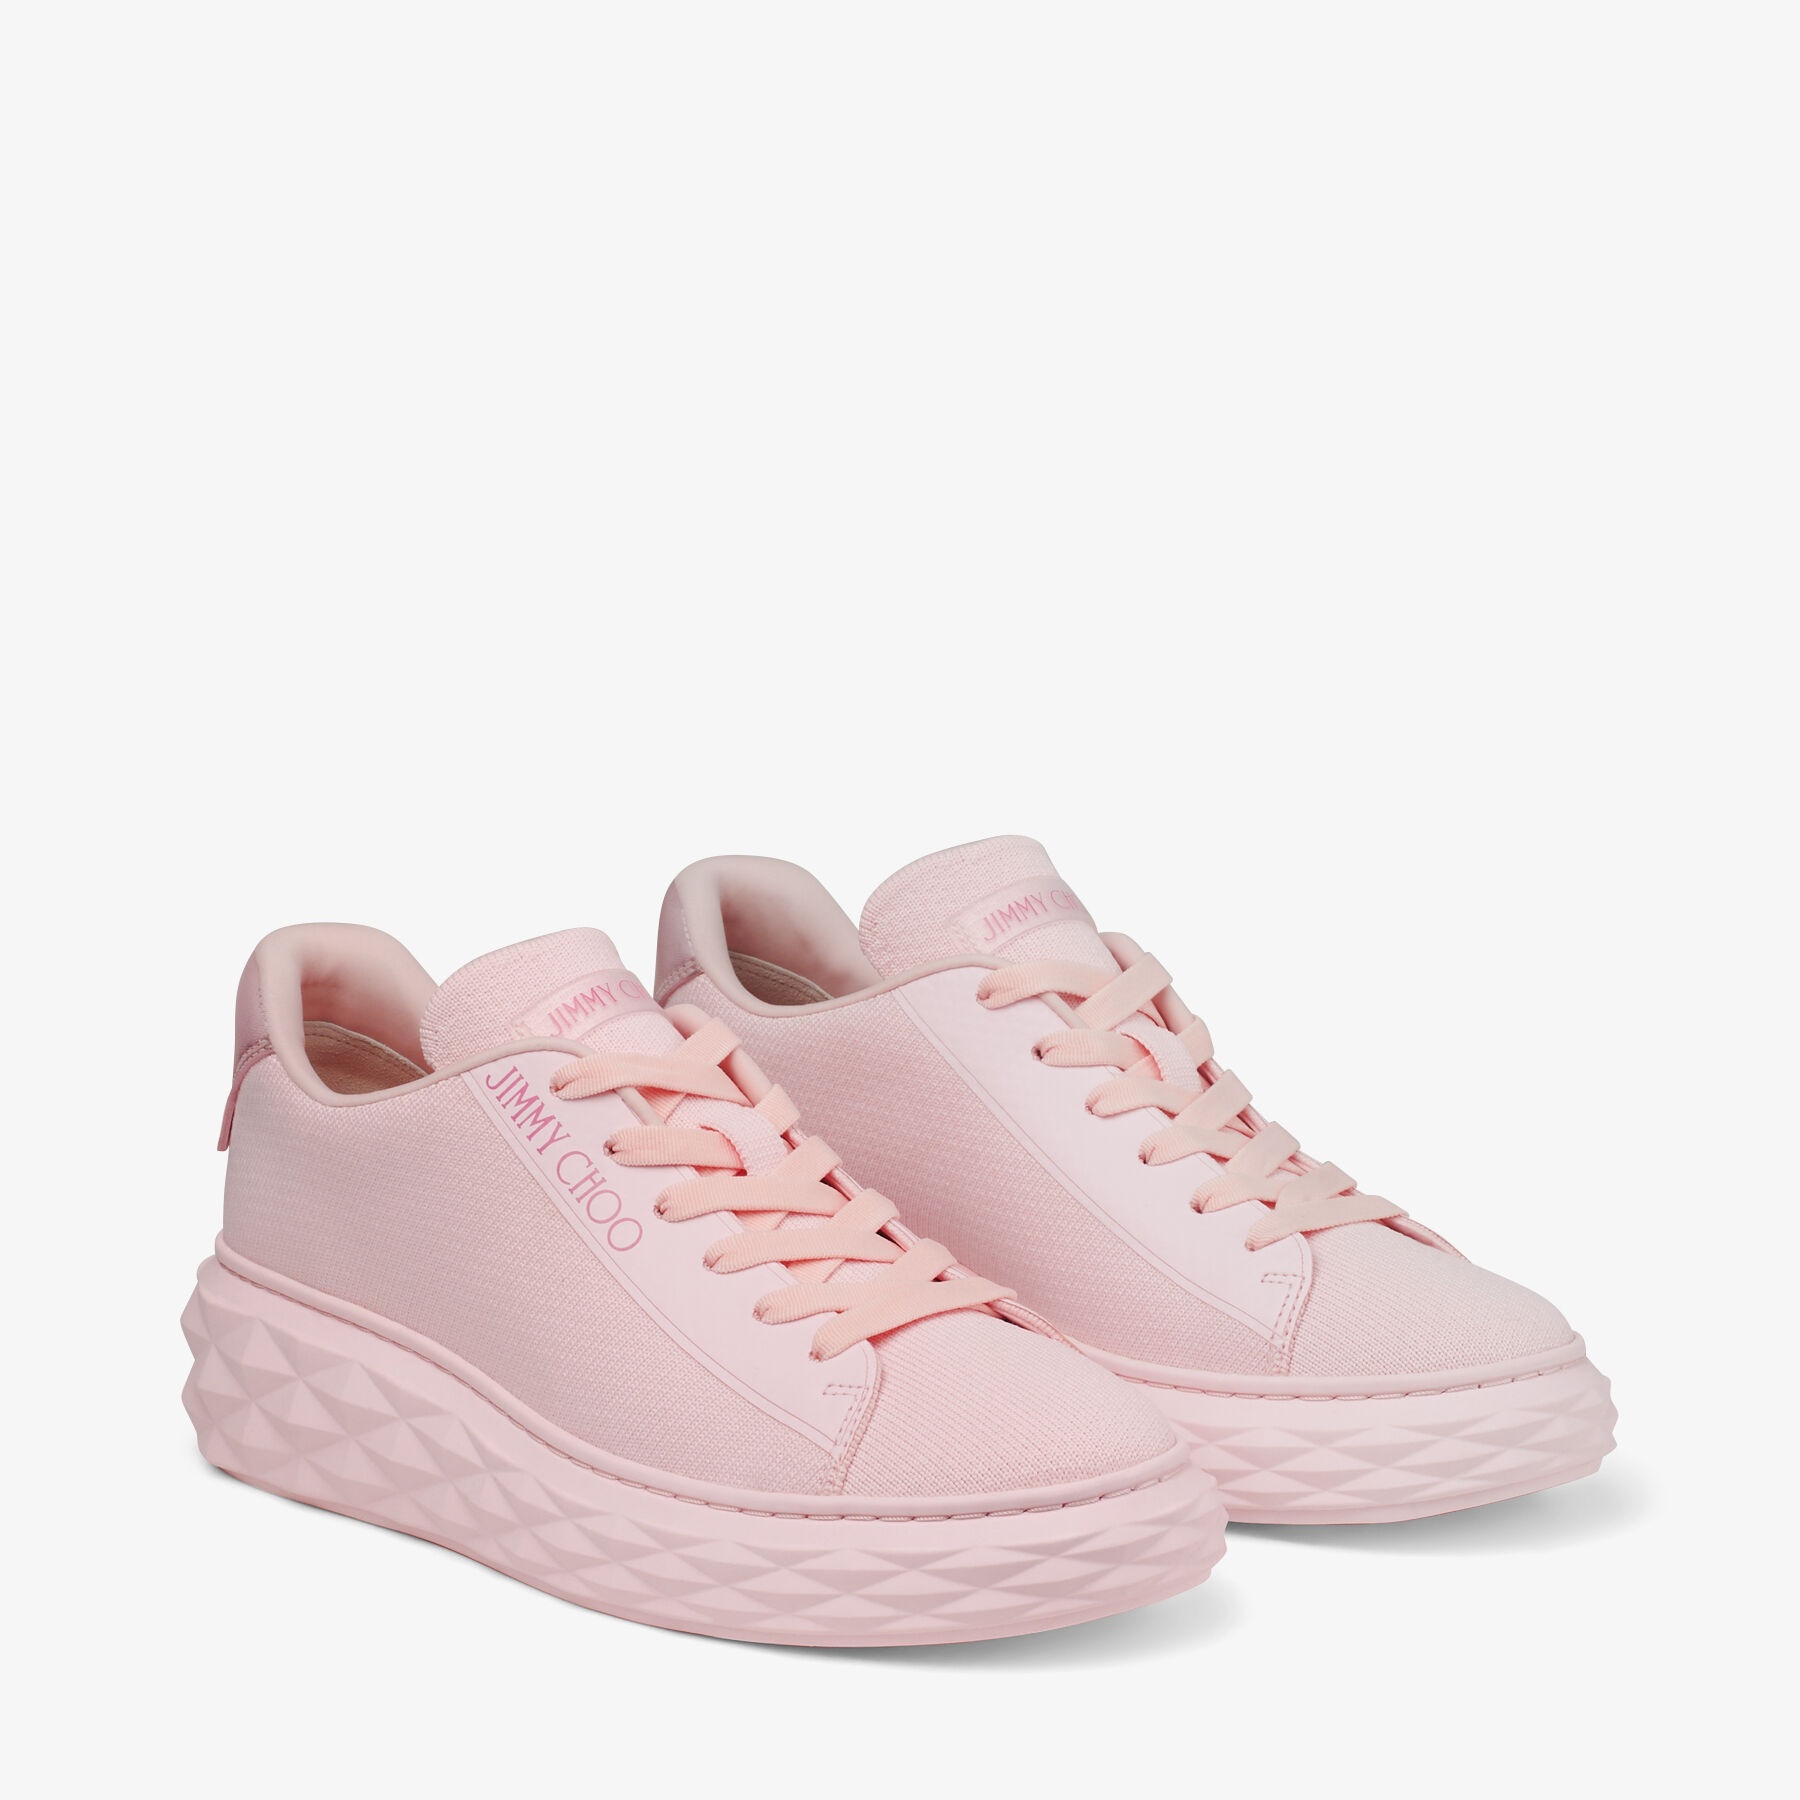 Diamond Light Maxi/f
Powder Pink Knit Low-Top Trainers with Platform Sole - 3